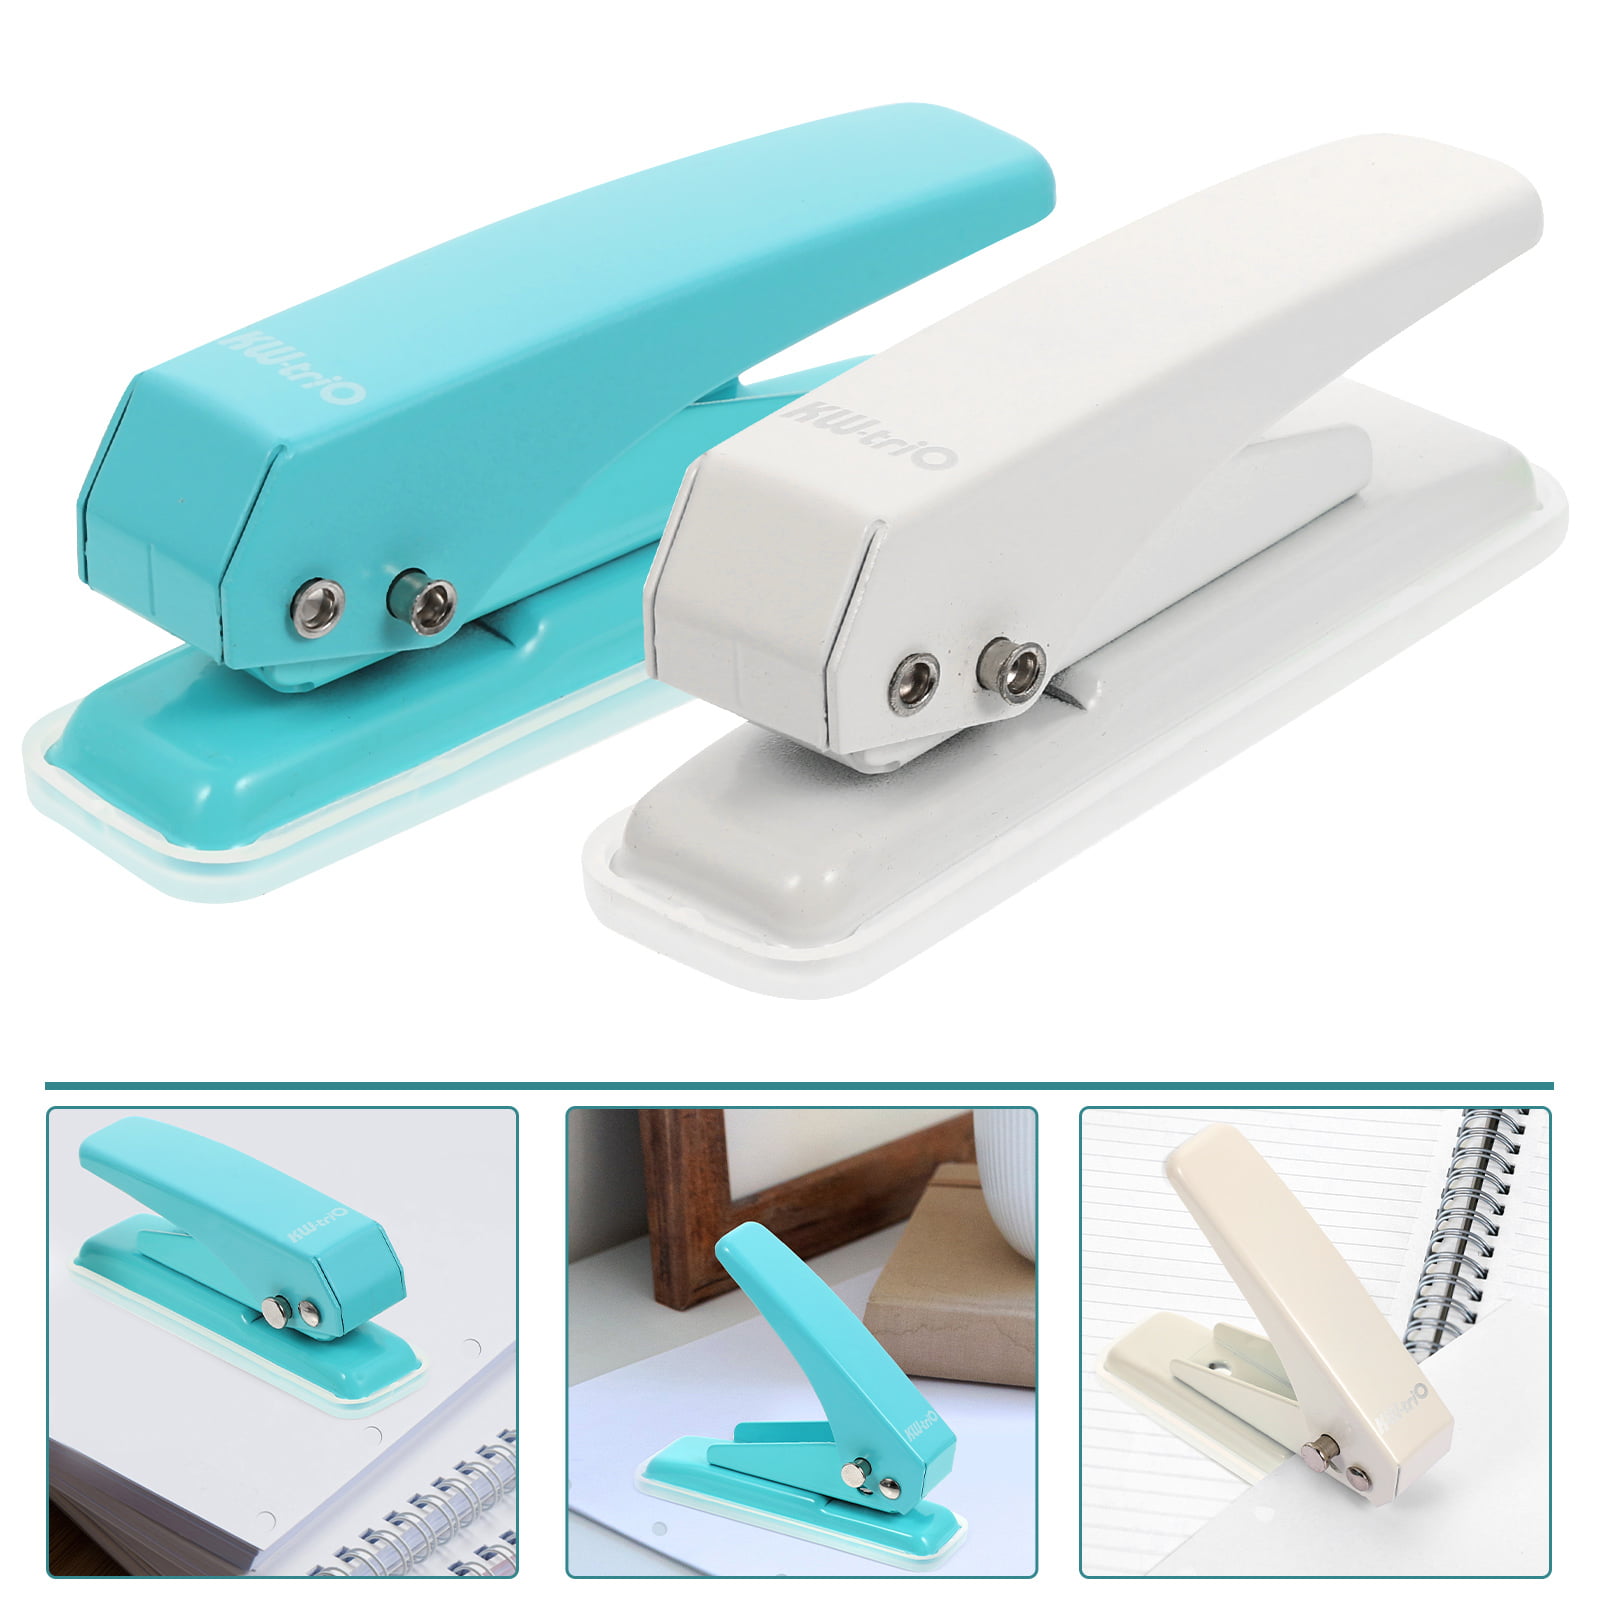  TEHAUX Manual Punch Space Saving Puncher for Home Hole Puncher  Single Hole Punch Earring Hole Punch 3 Hole Punch Heavy Duty Hole Punch  Shapes Paper Punch Small Plastic Punched Card 